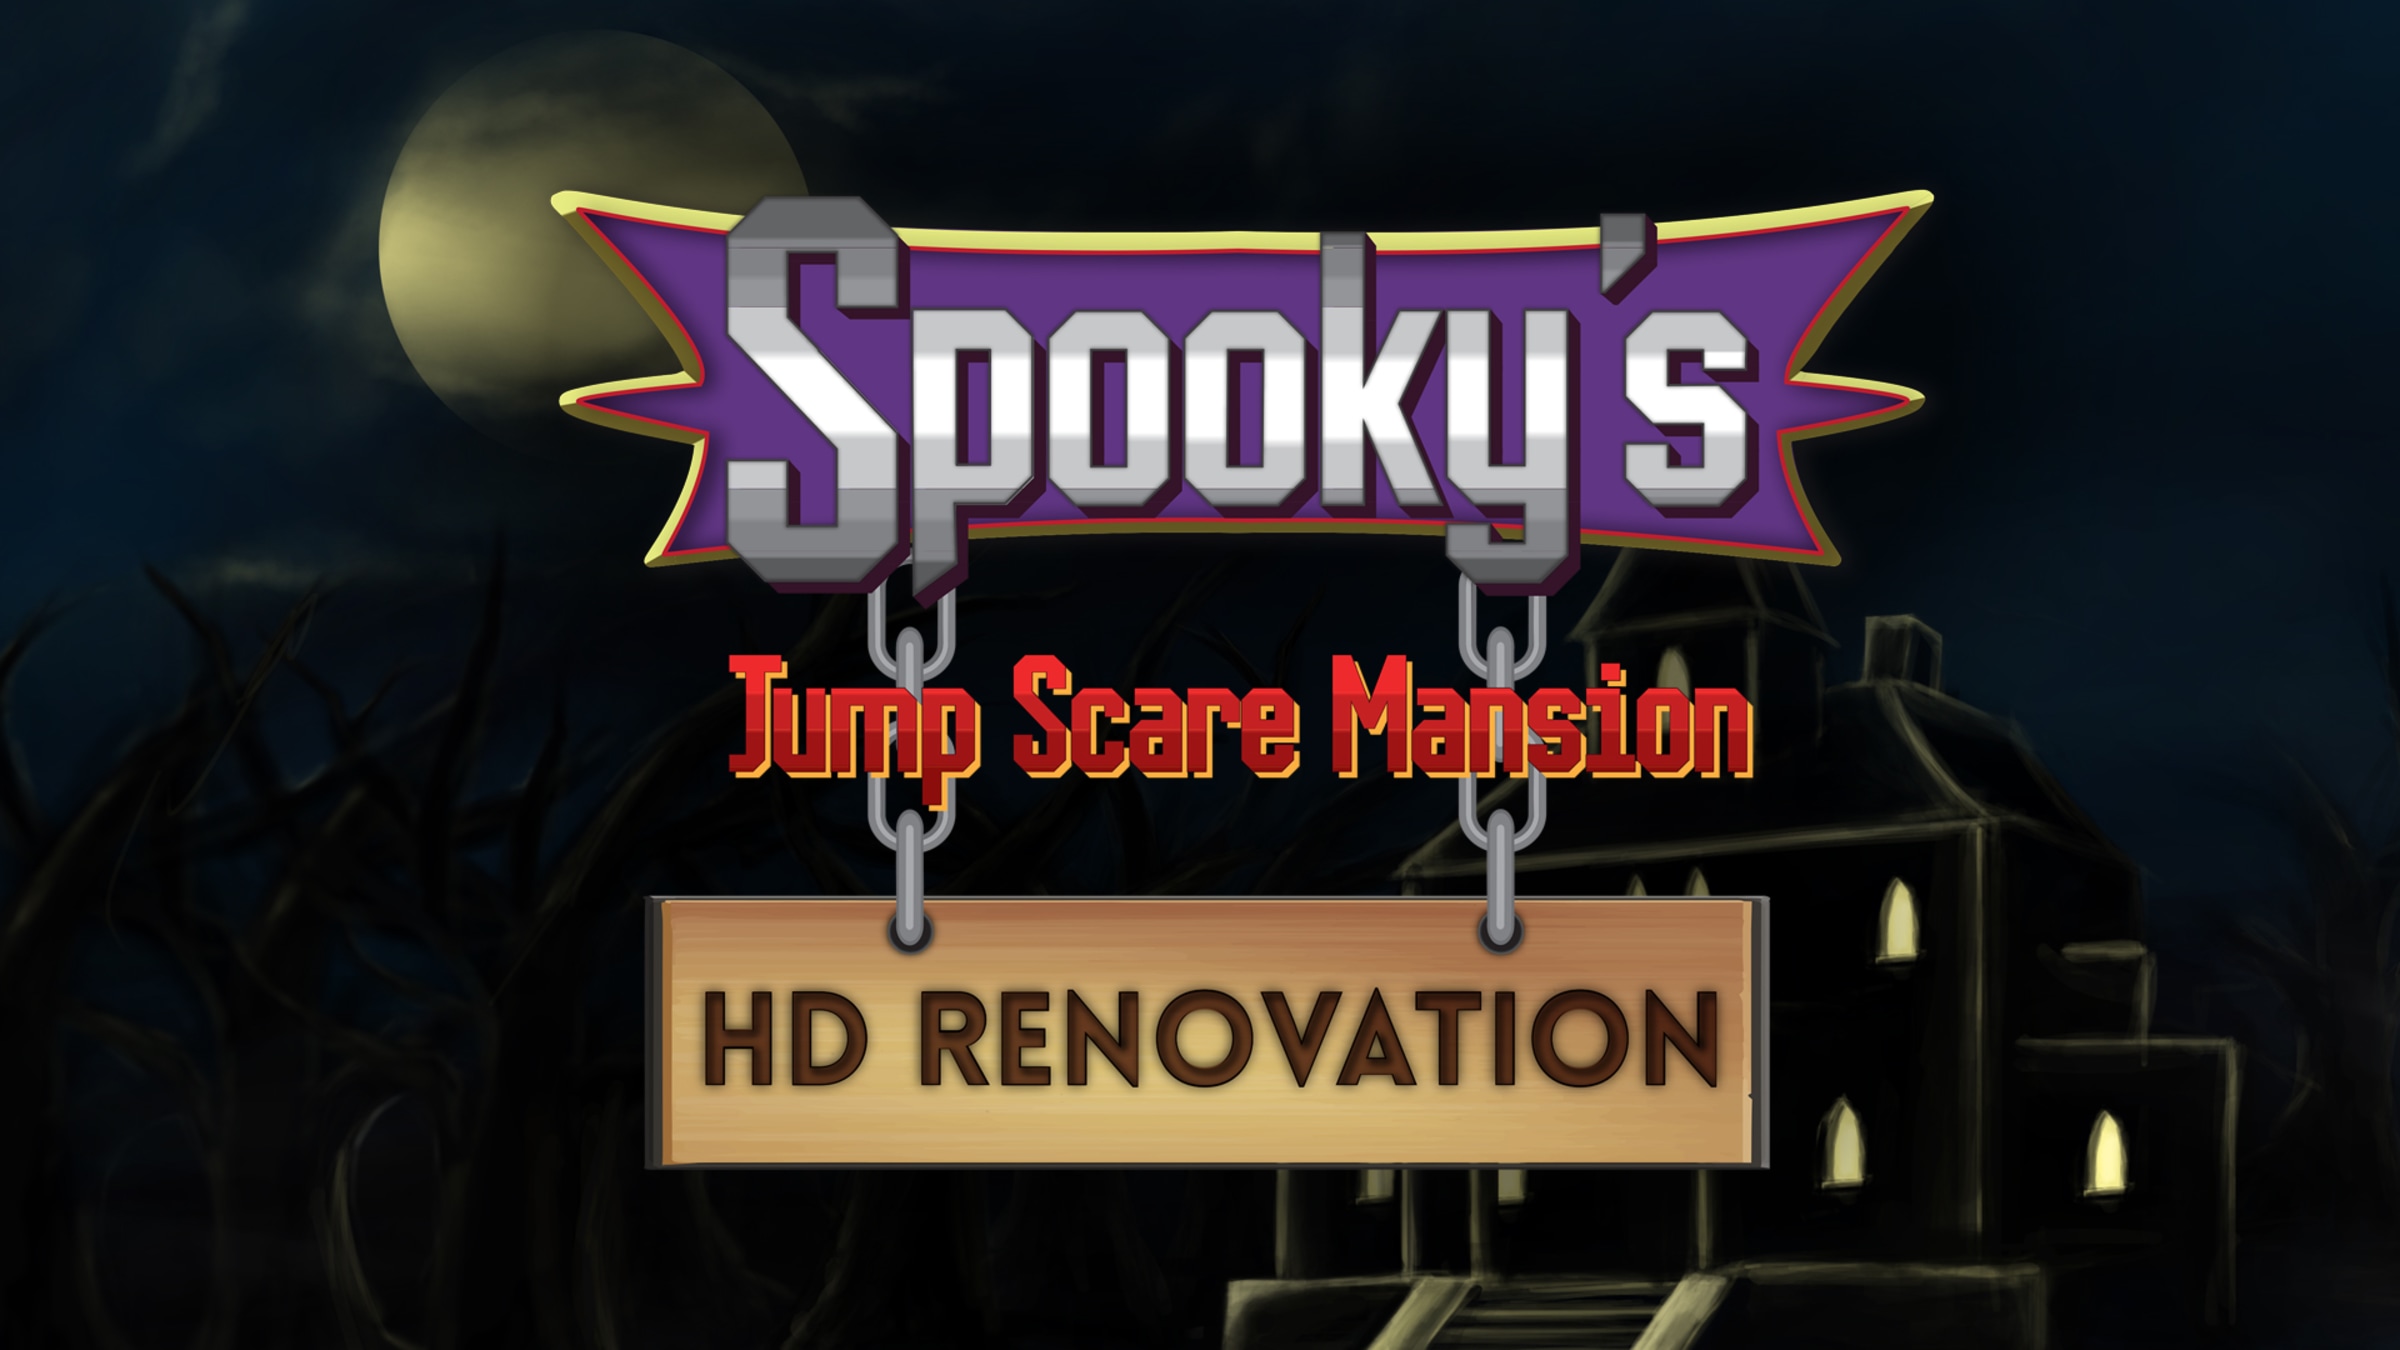 https://assets.nintendo.com/image/upload/c_fill,w_1200/q_auto:best/f_auto/dpr_2.0/ncom/en_US/games/switch/s/spookys-jump-scare-mansion-hd-renovation-switch/